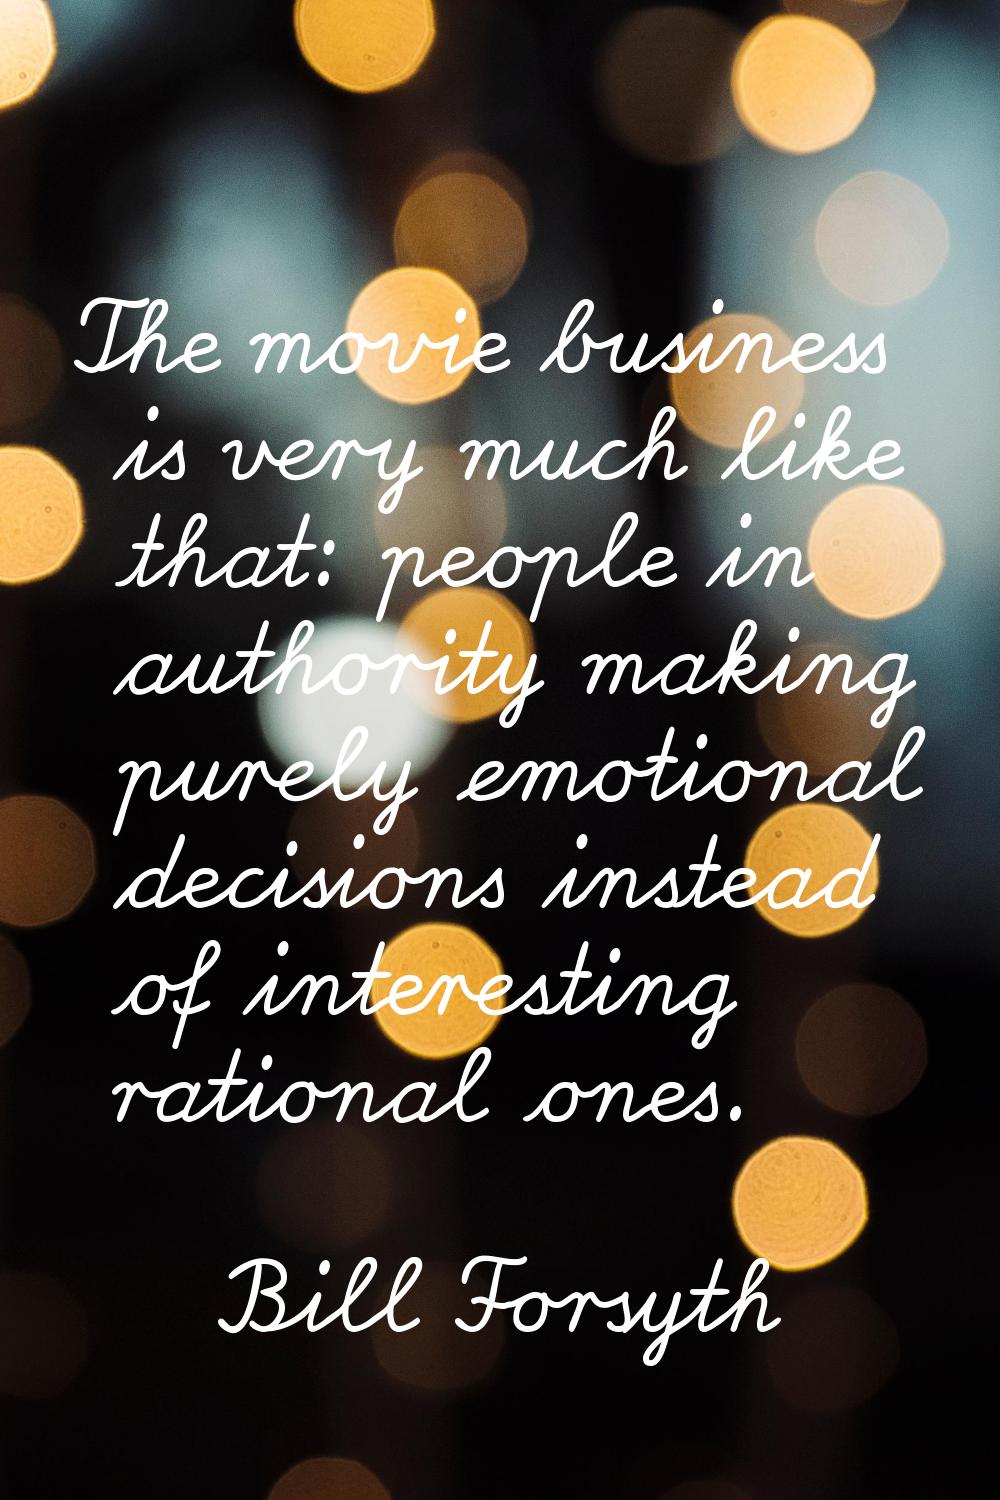 The movie business is very much like that: people in authority making purely emotional decisions in